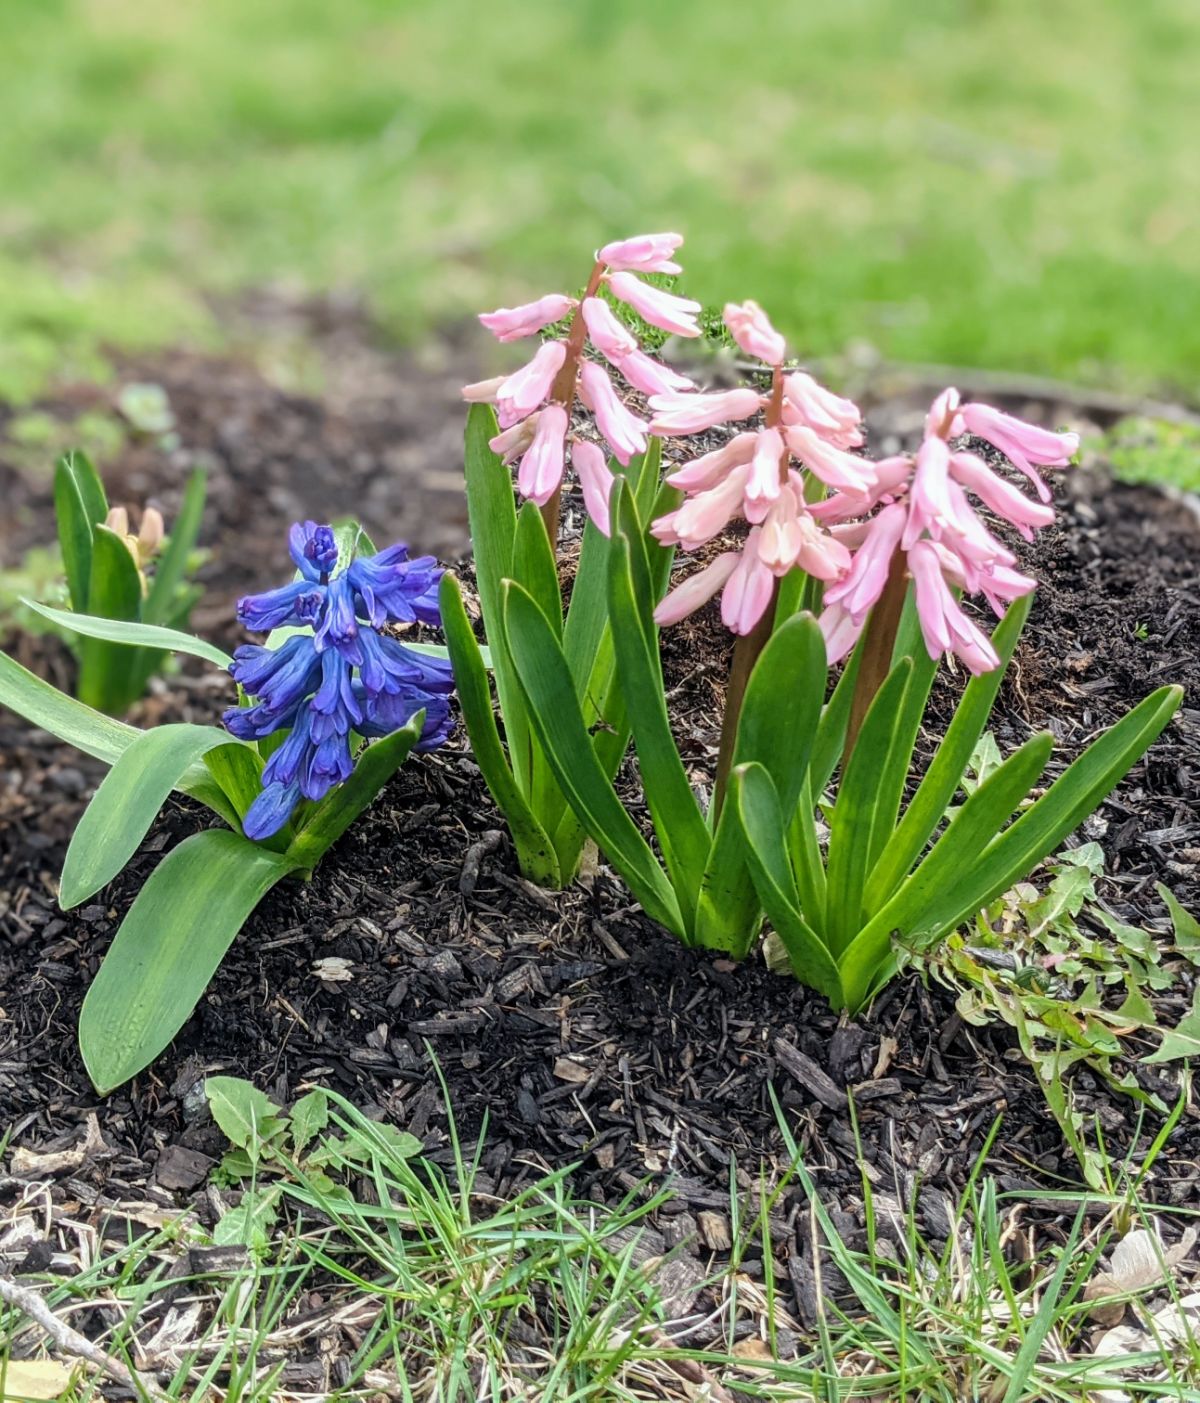 Hyacinths transplanted to a new spot in the garden